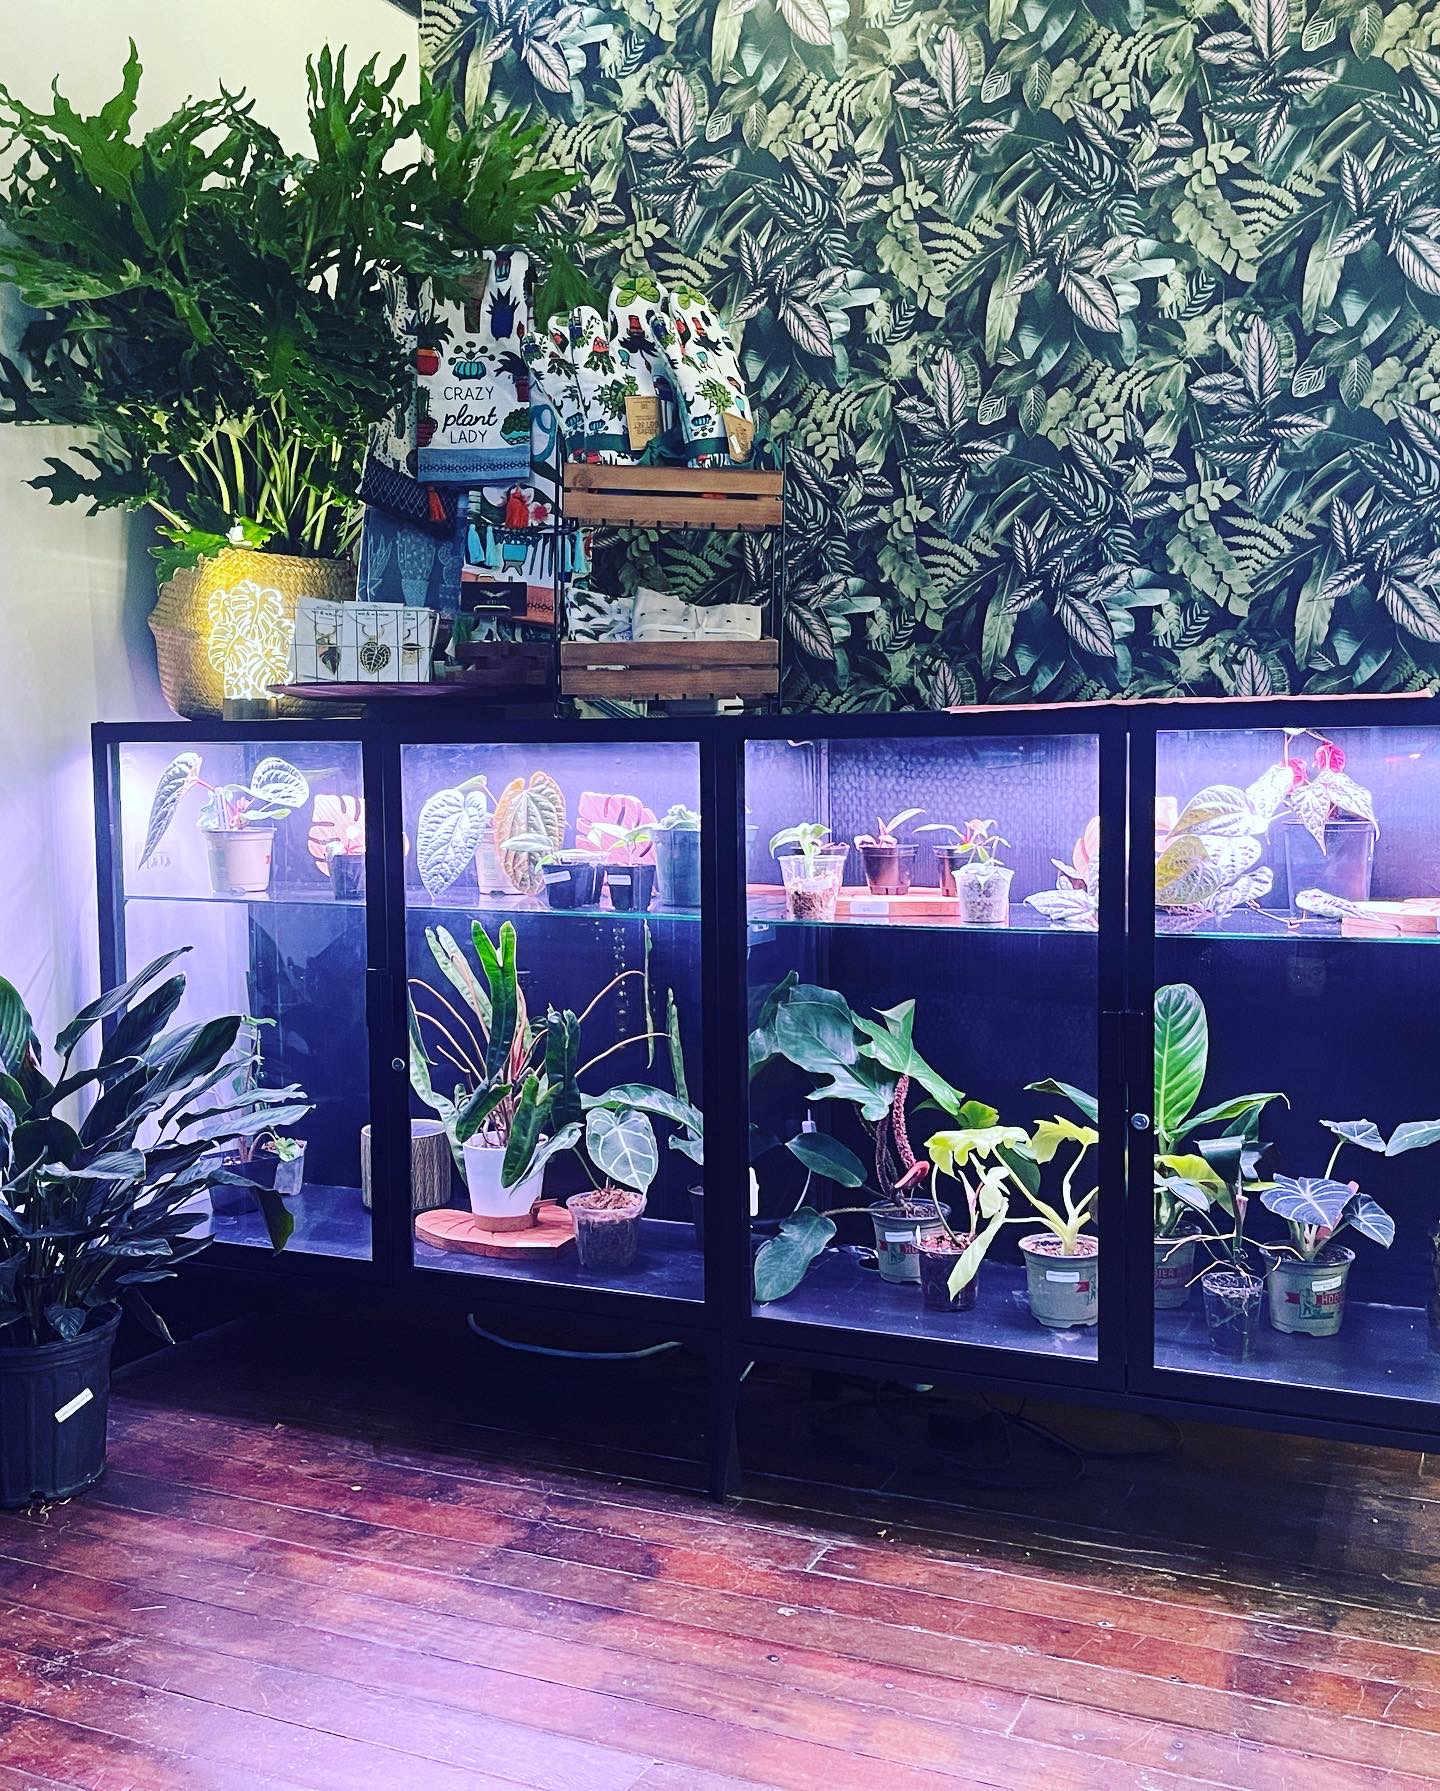 A lighted case filled with plants